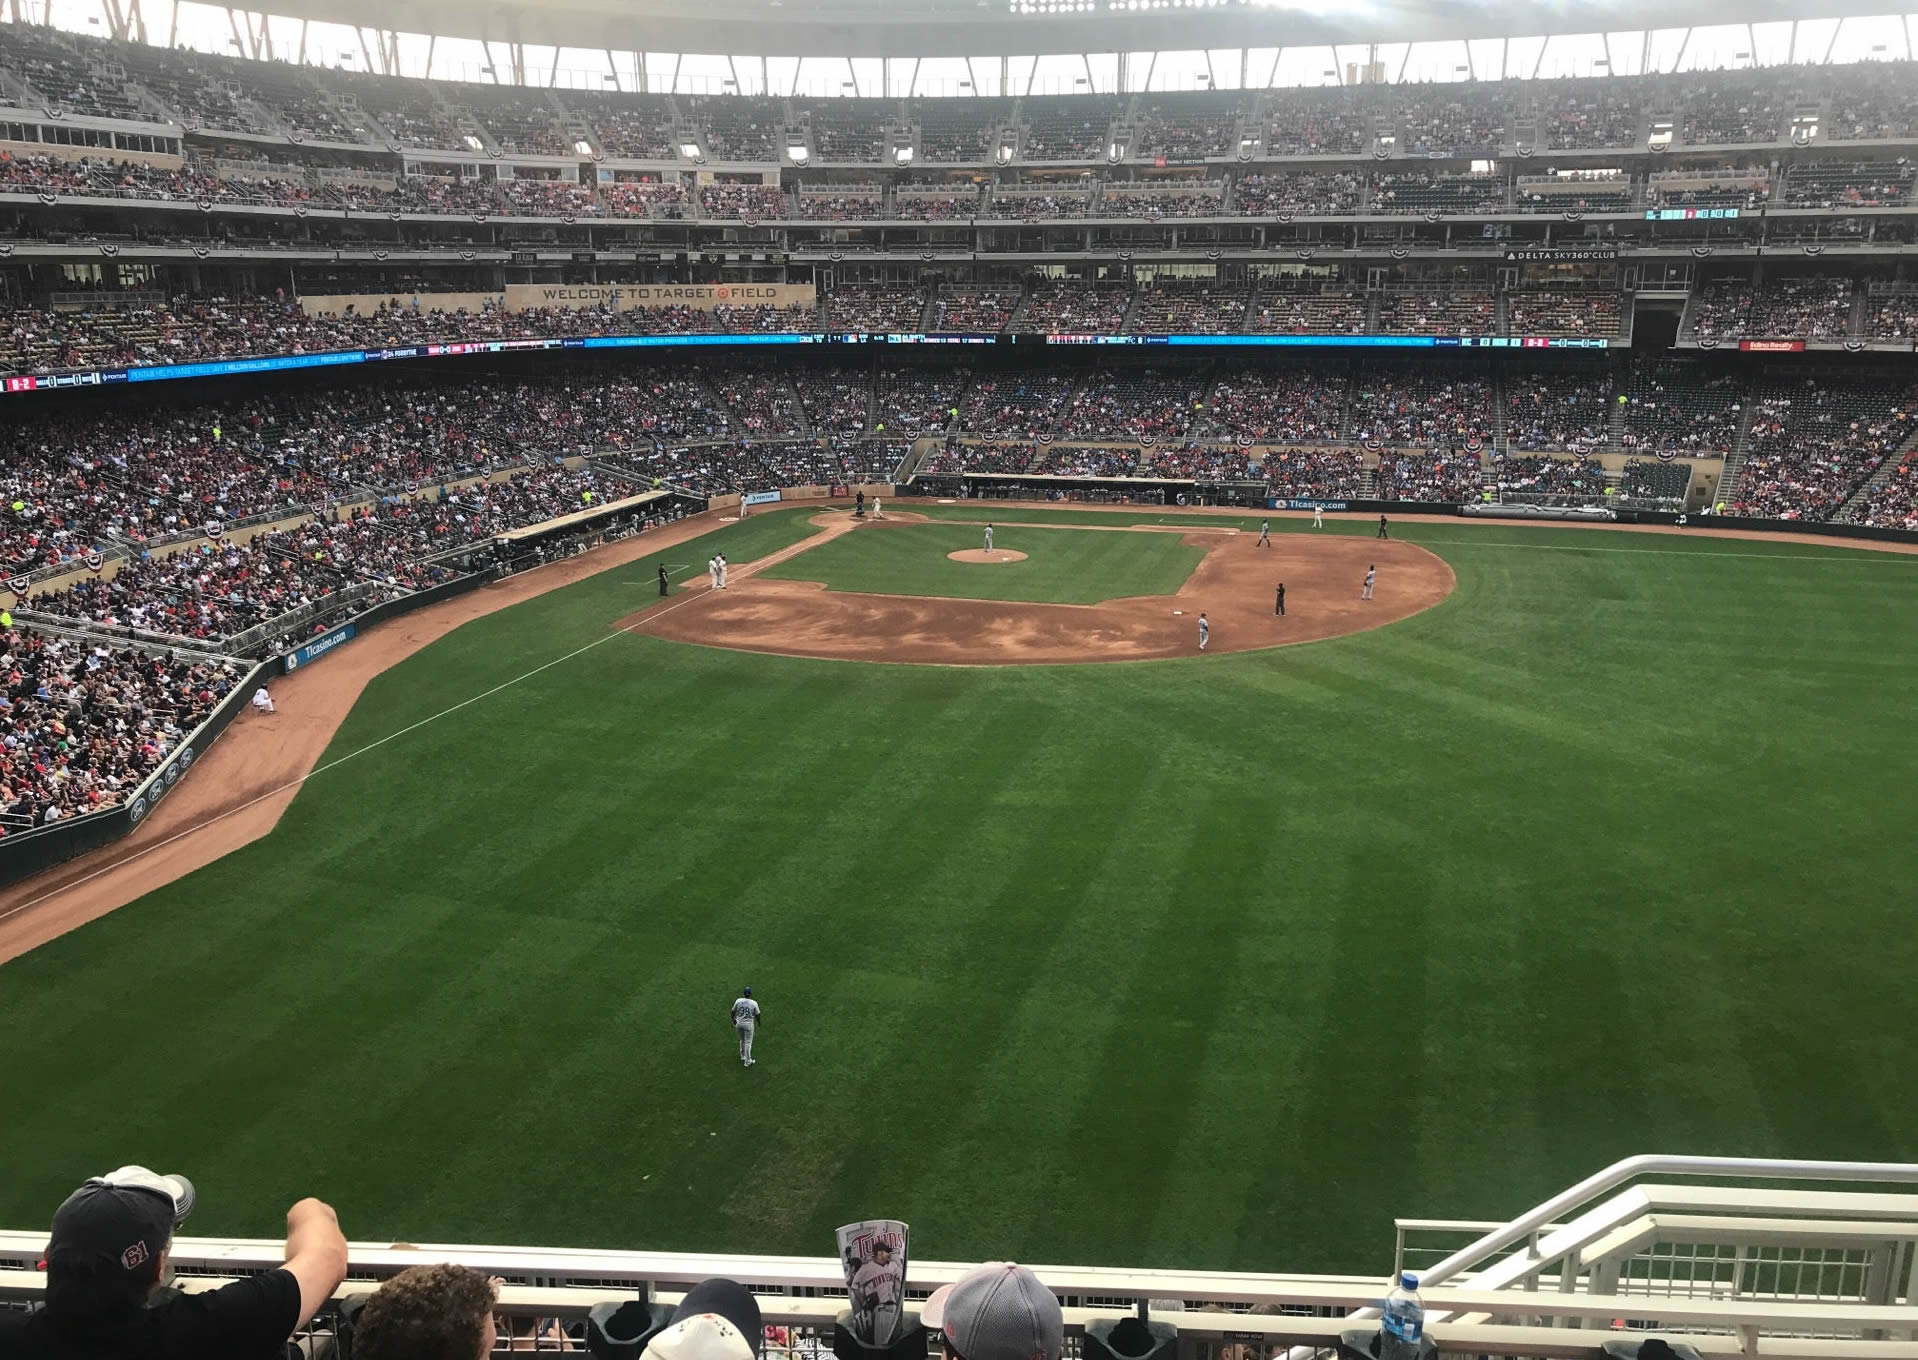 section 239, row 5 seat view  - target field